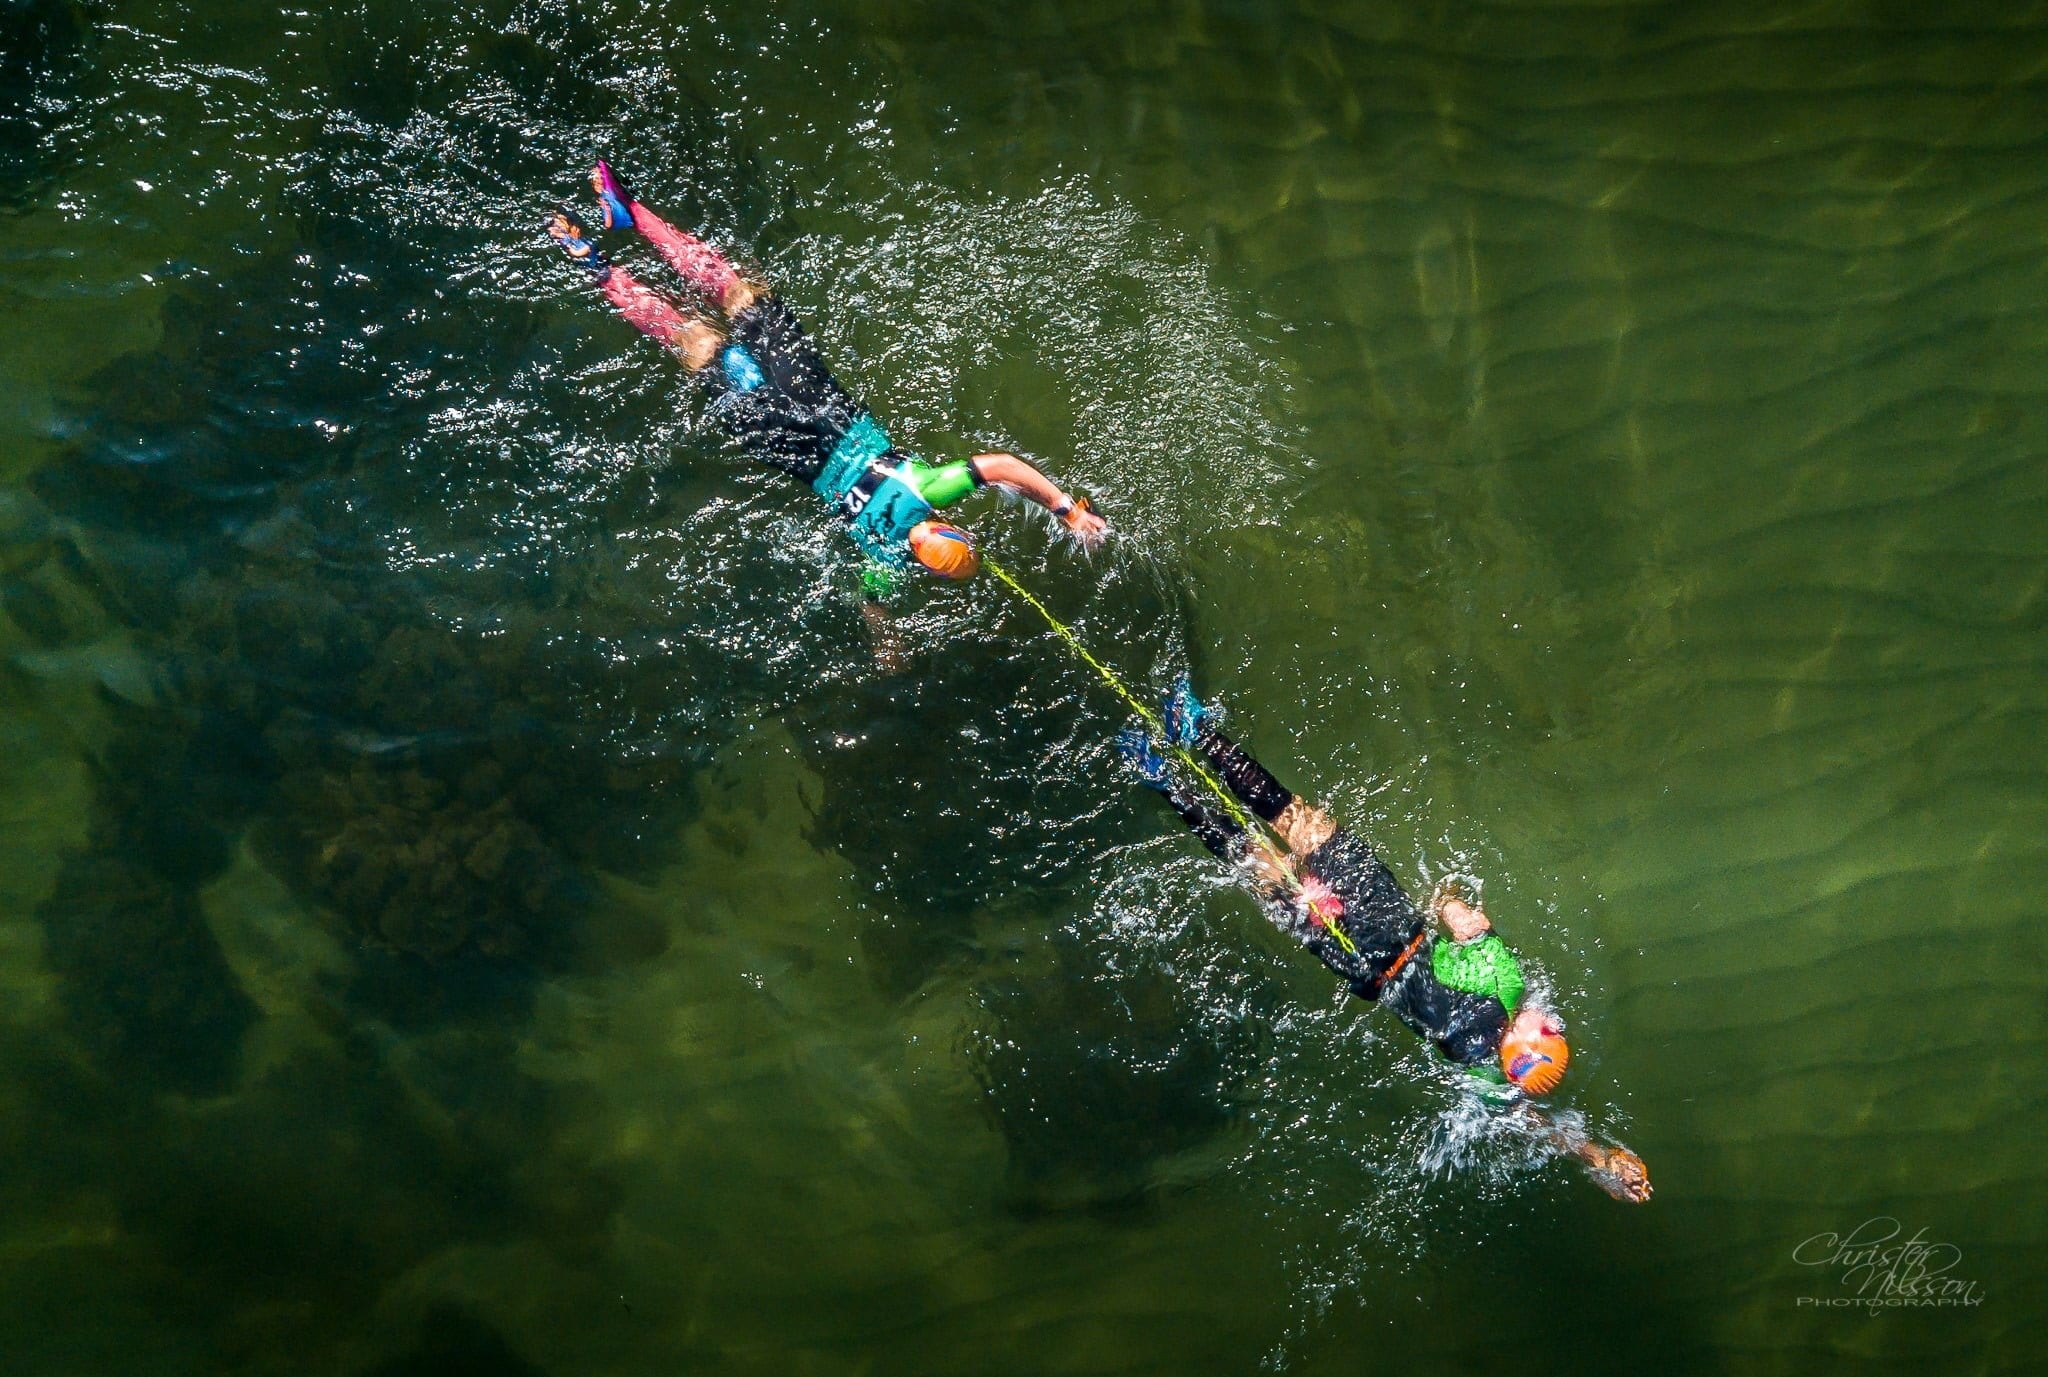 The World of Swimrun: A Story of a First Time Swimrunner from the USA in Torekov, Sweden